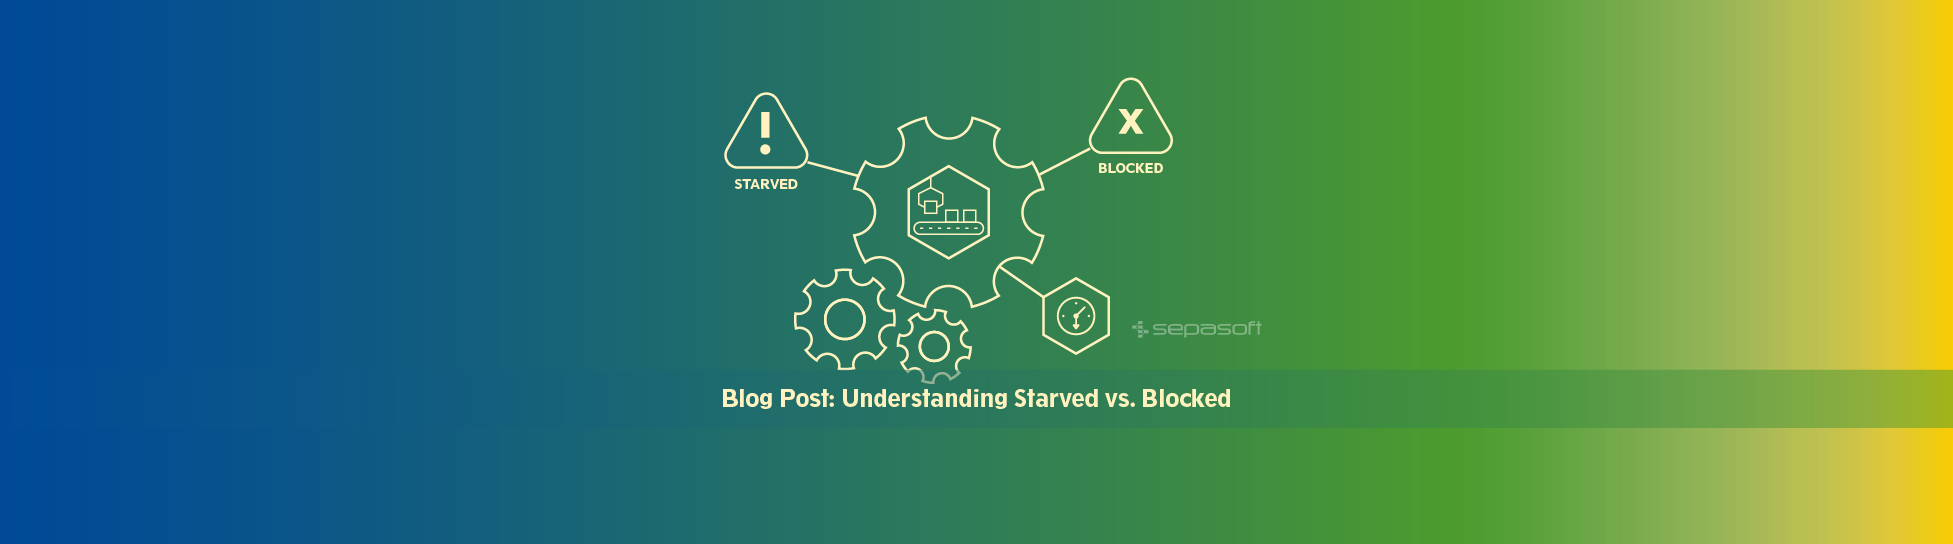 Blog Post: Starved and Blocked